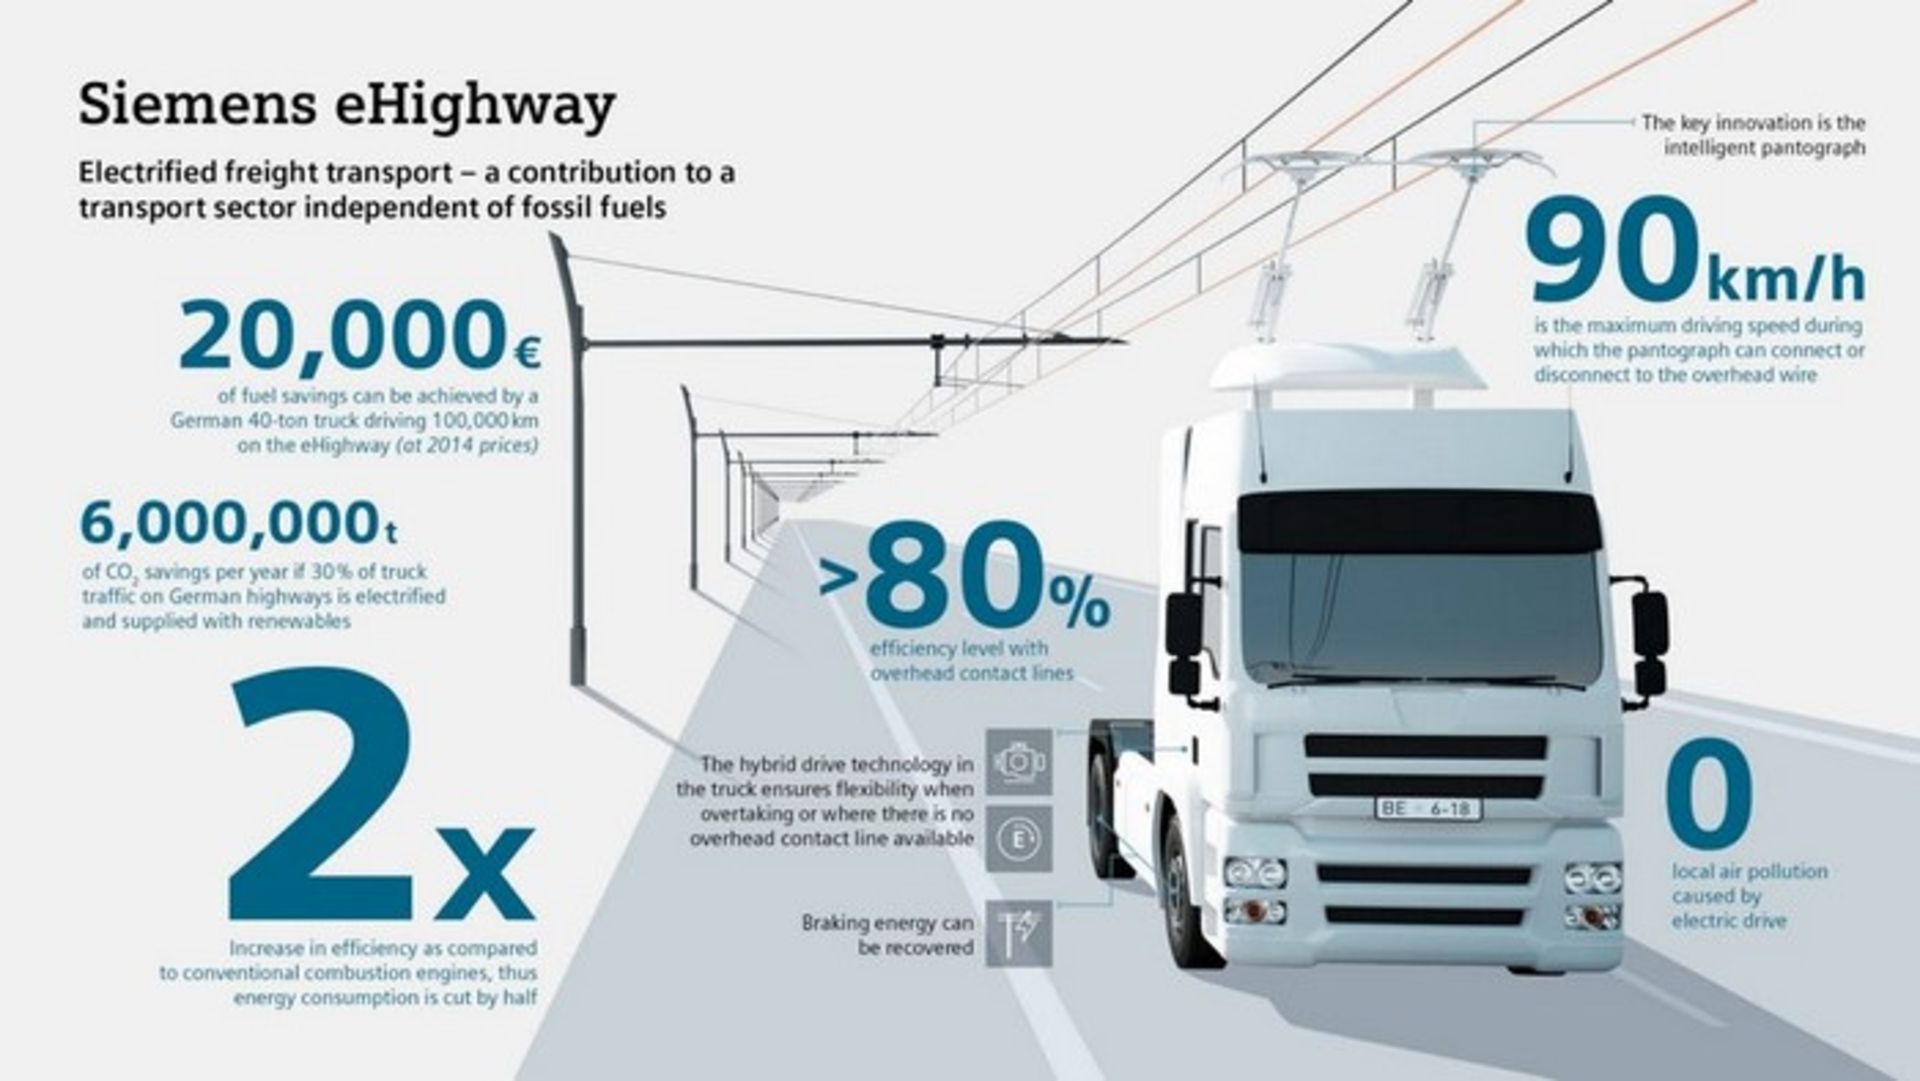 Germany’s first eHighway